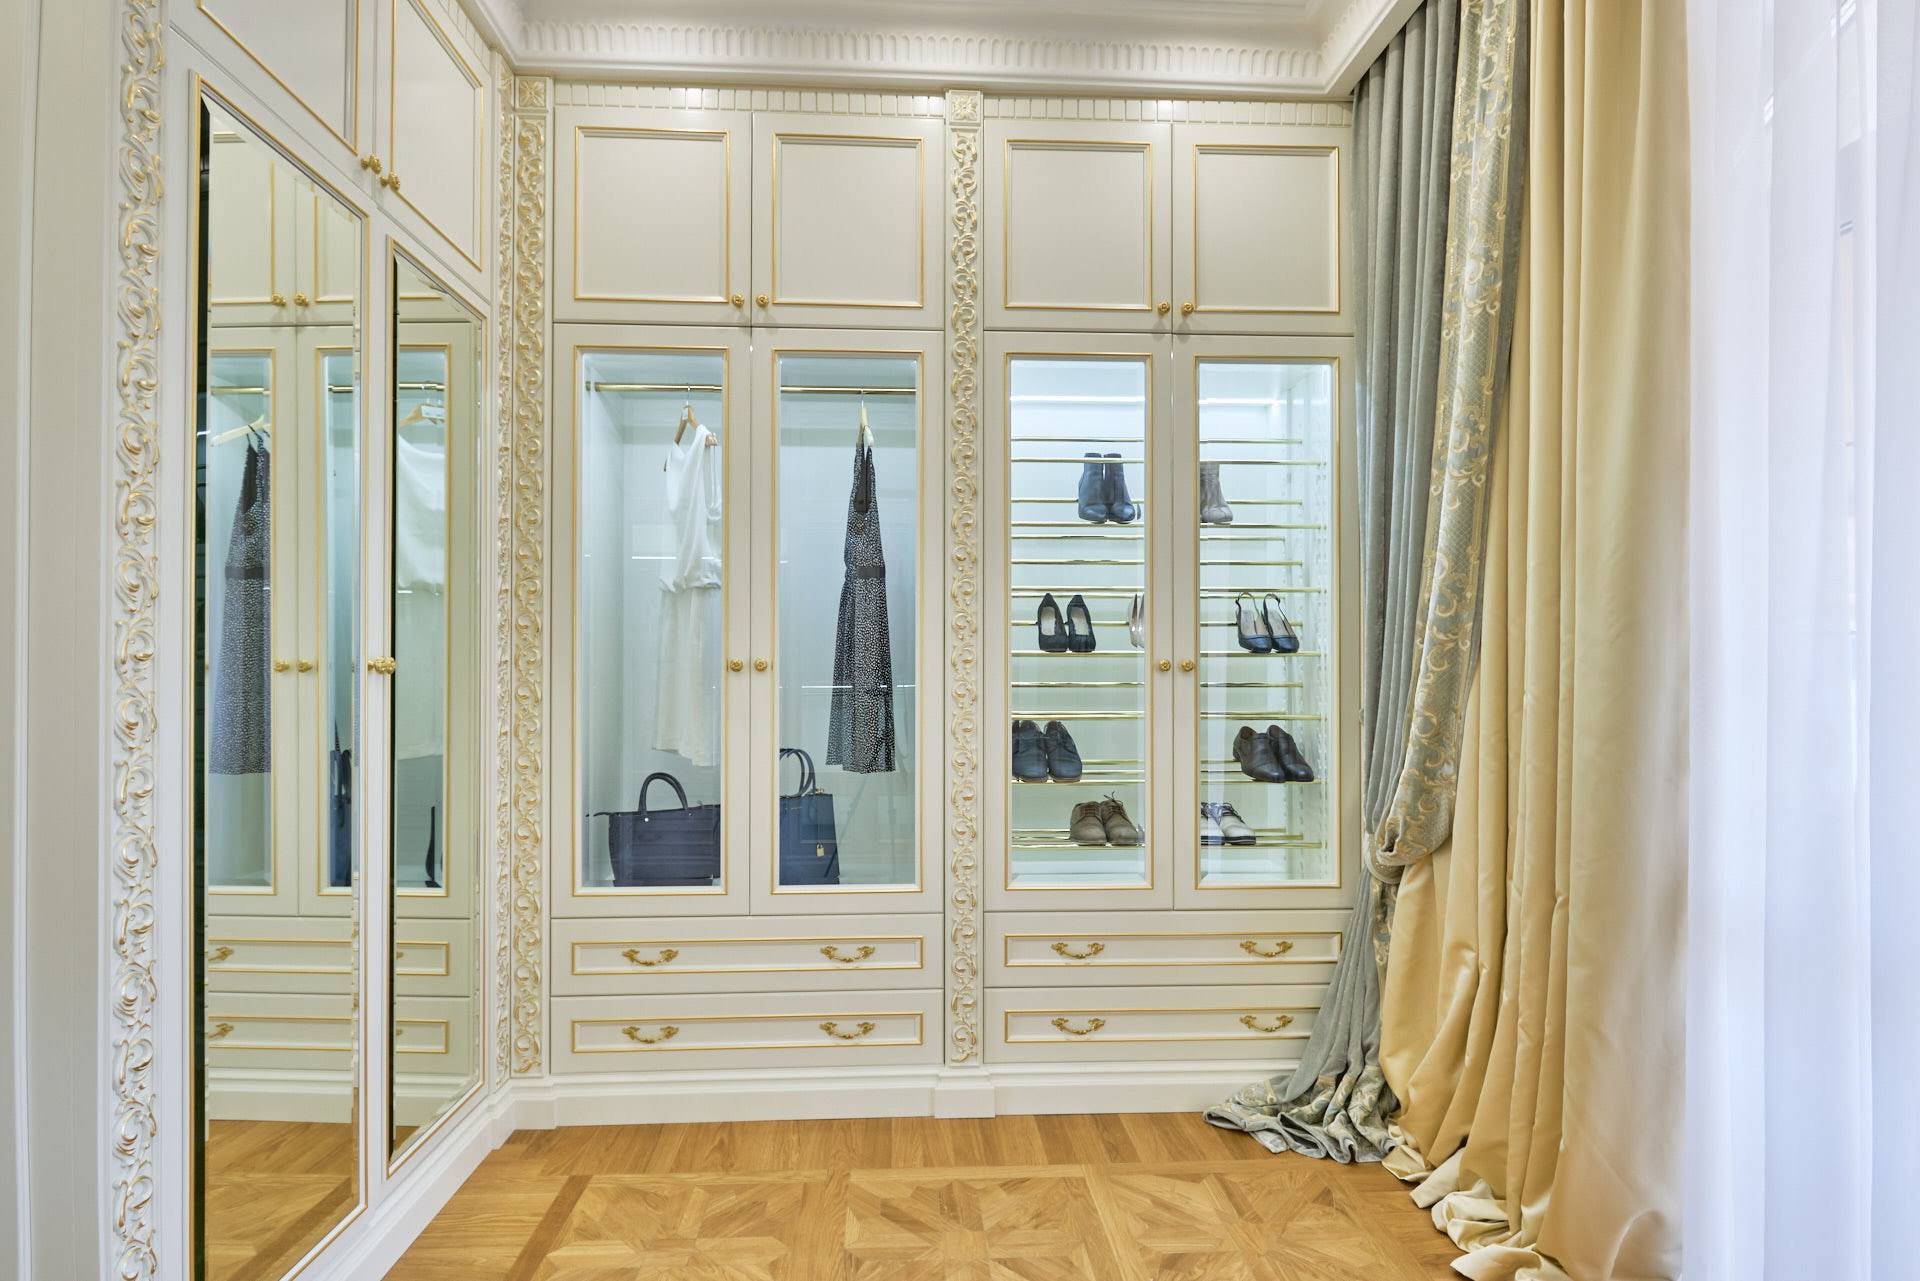 Dressing room in a classic interior